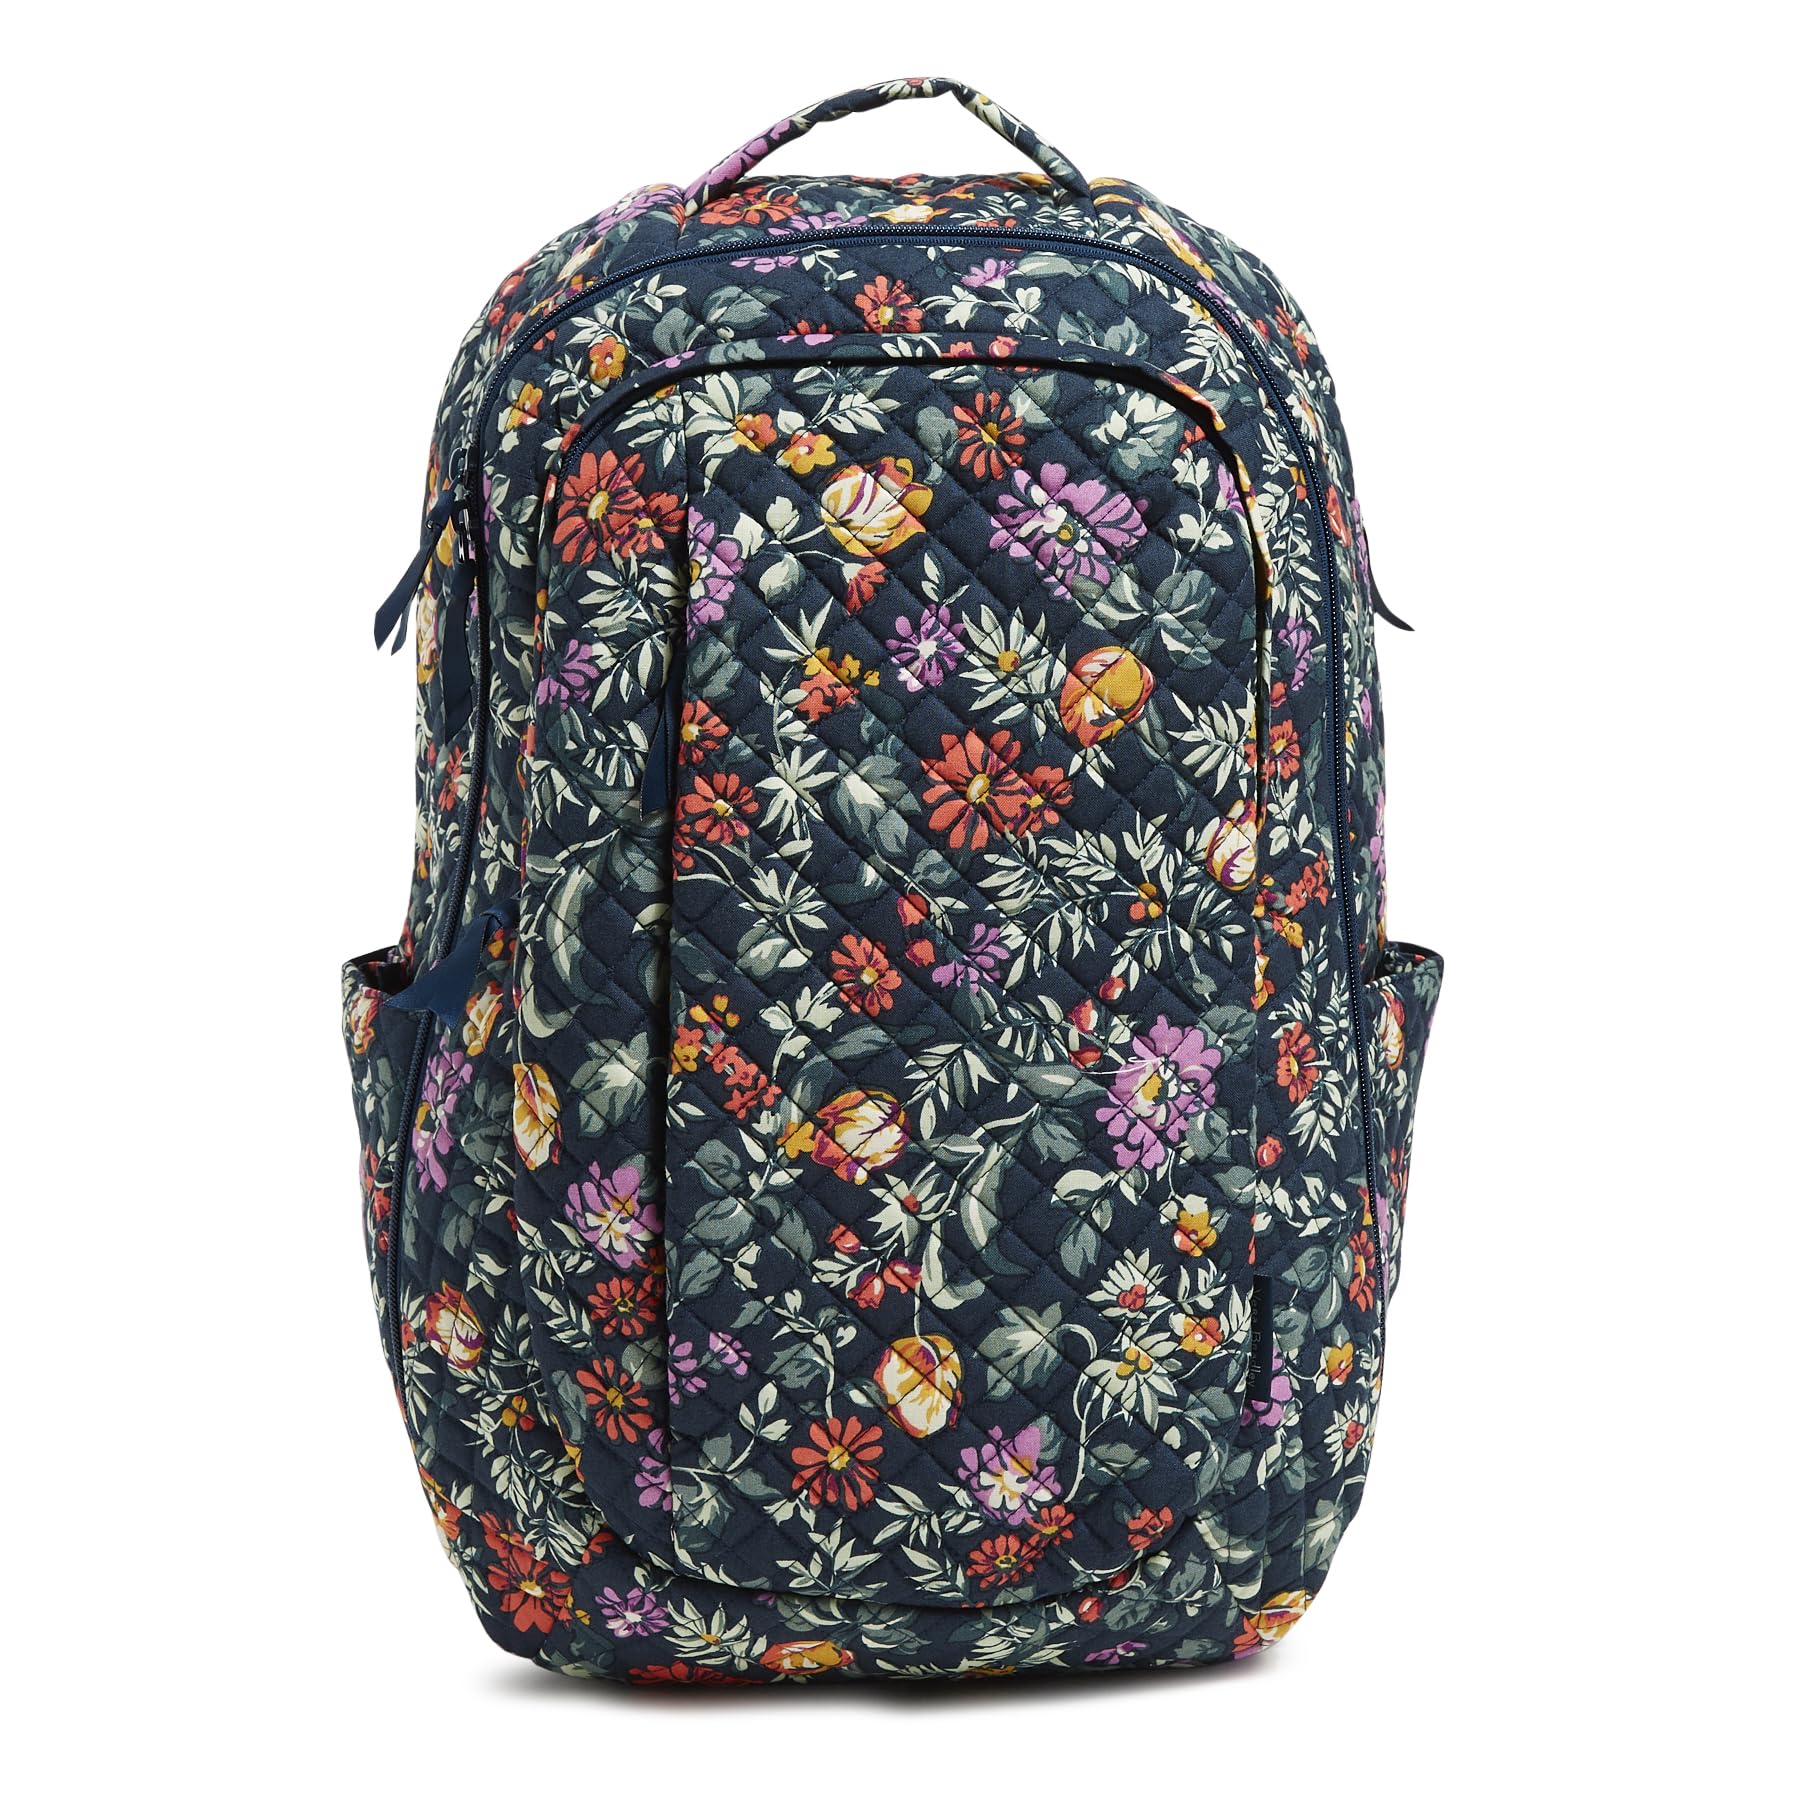 Vera Bradley Women's, Cotton Large Travel Backpack Travel Bag, Fresh-cut Floral Green, One Size